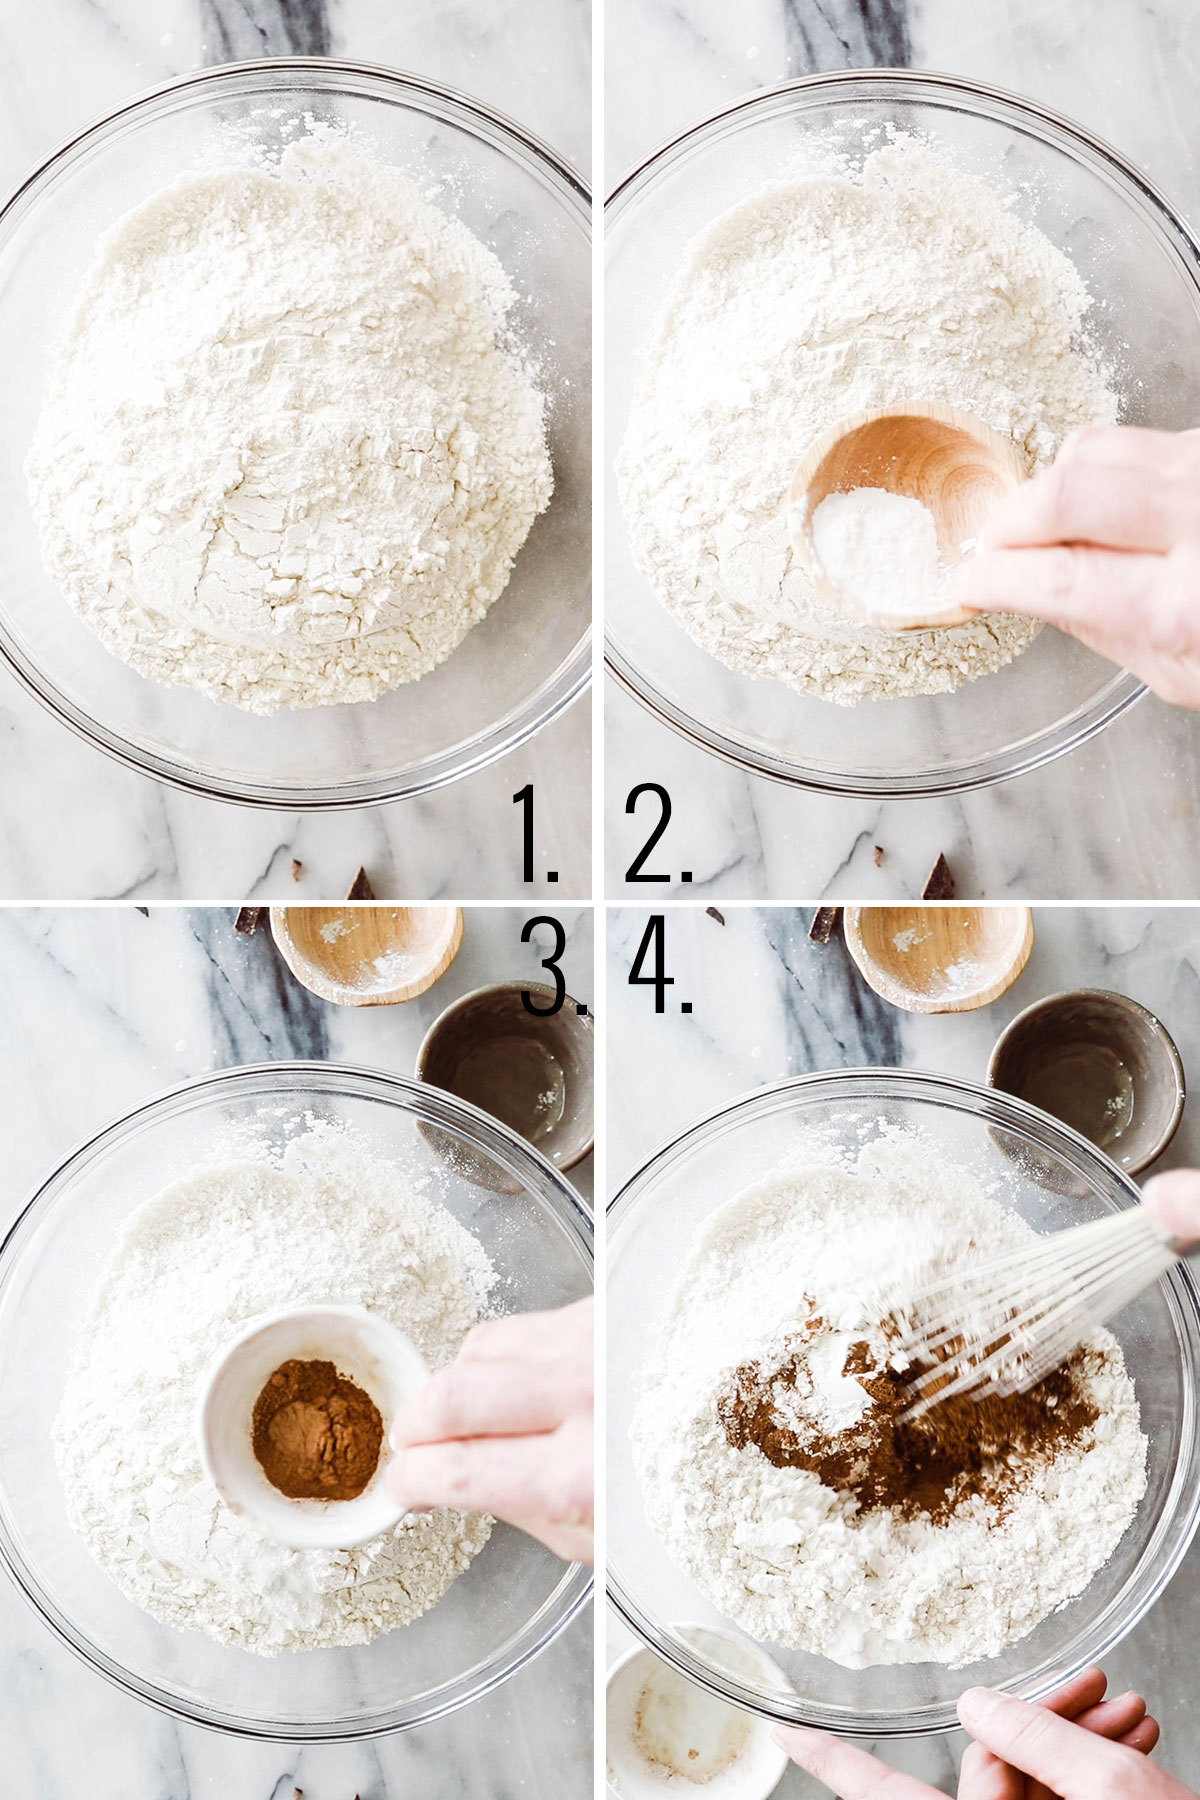 4 photos of mixing together the dry ingredients in a glass bowl